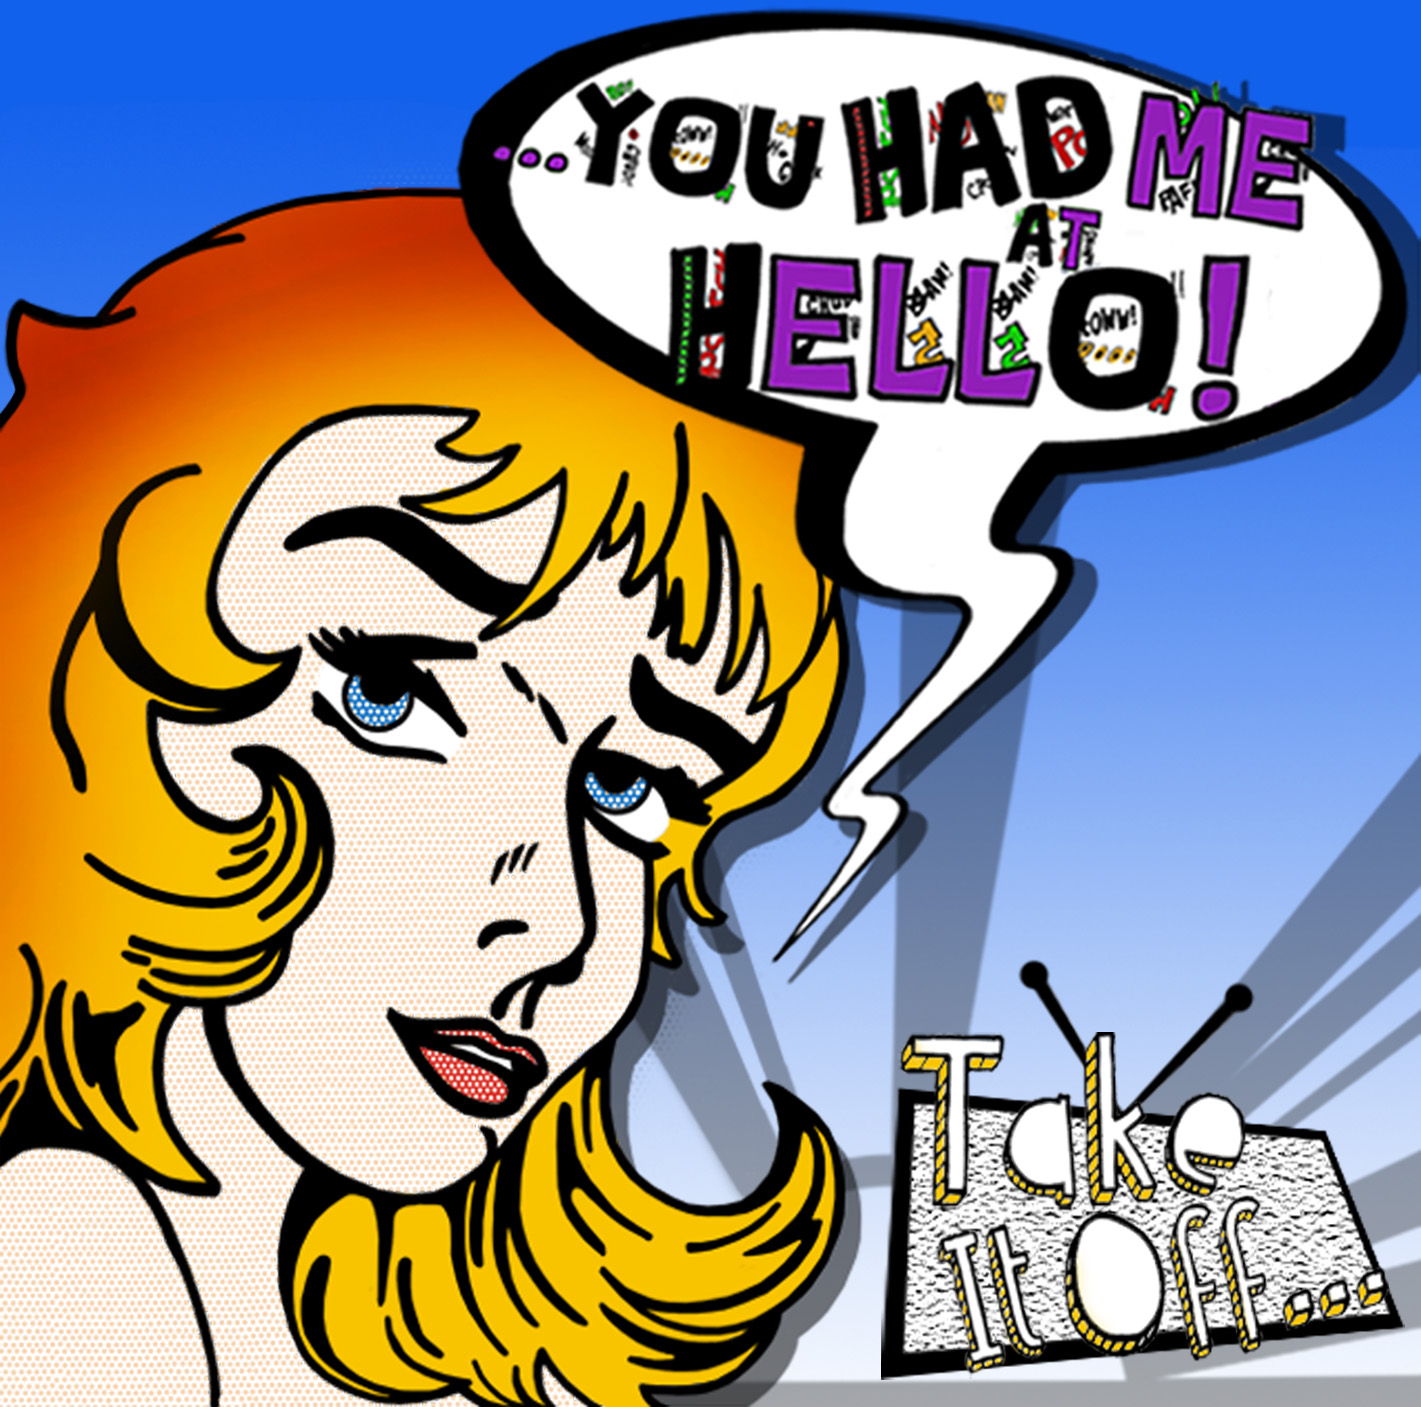 You Had Me At Hello! - Take It Off